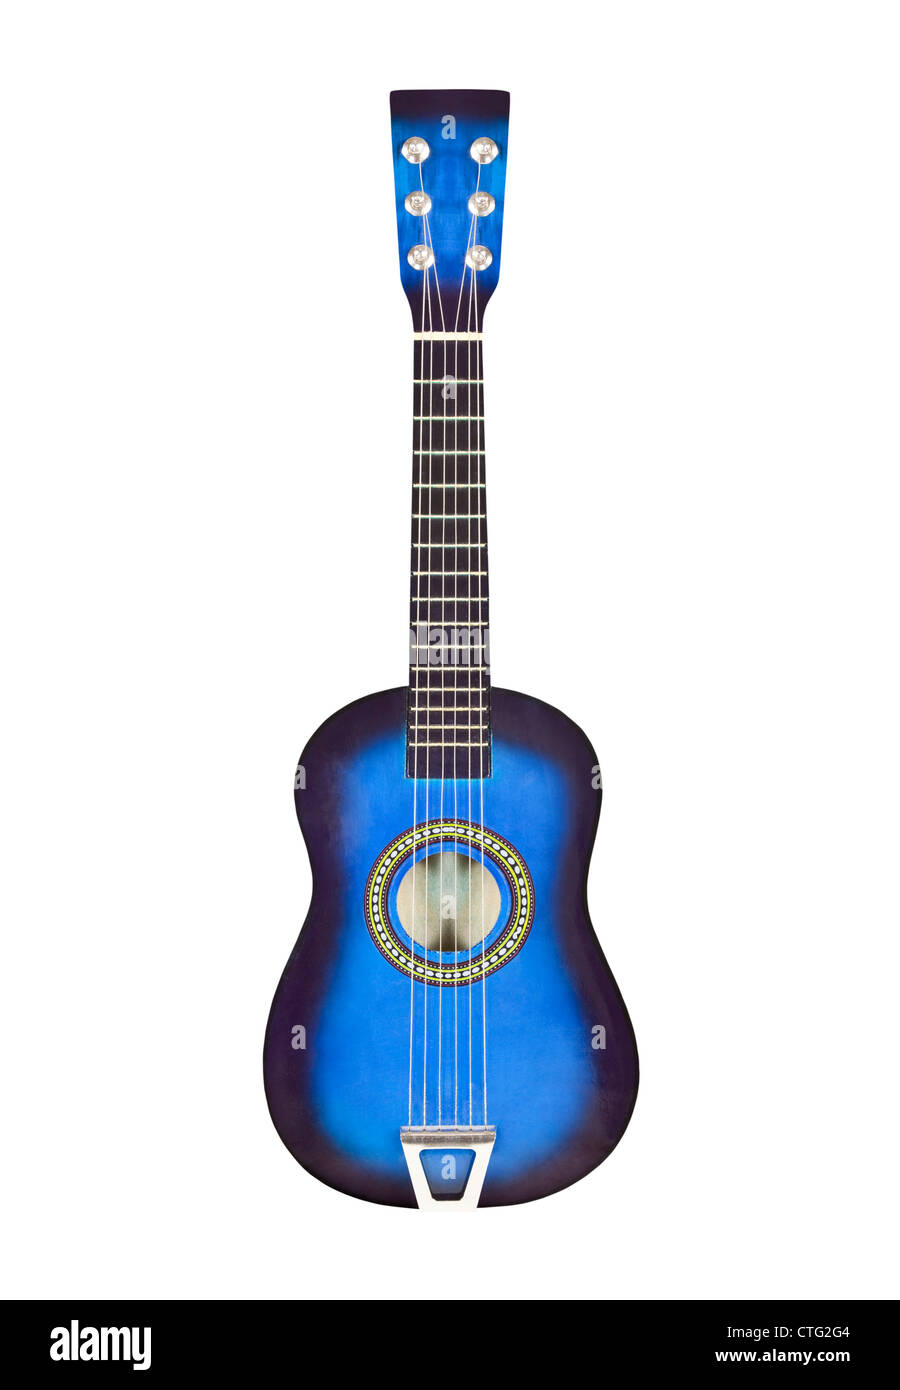 Deep blue toy six string ukulele size toy guitar isolated with clipping path. Stock Photo